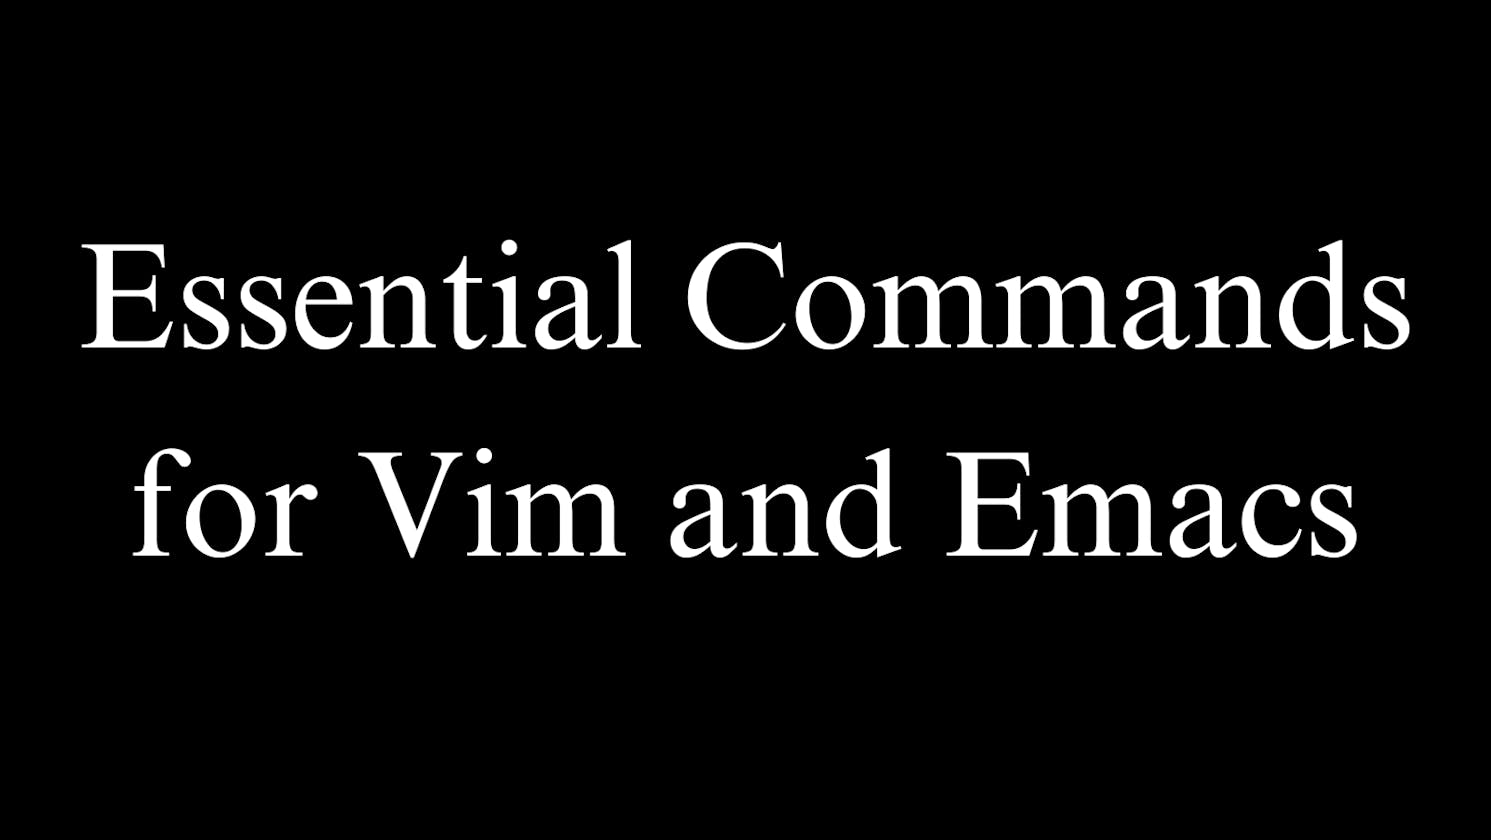 Essential Commands for Vim and Emacs